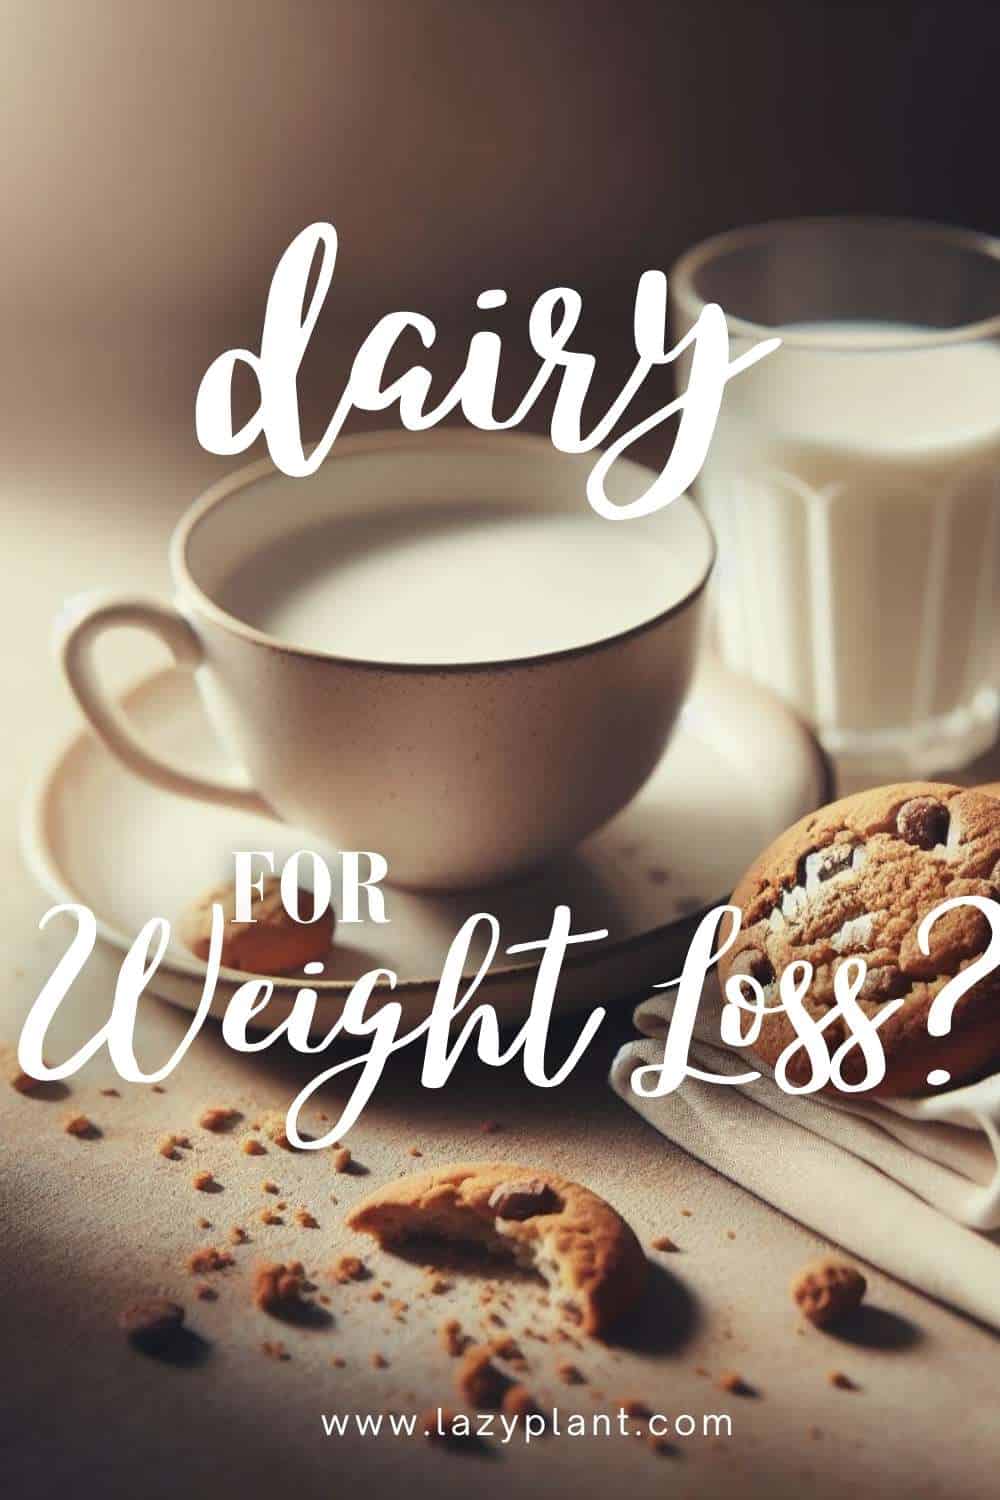 Health tips: Not all dairy products are good for Health & Weight Loss.